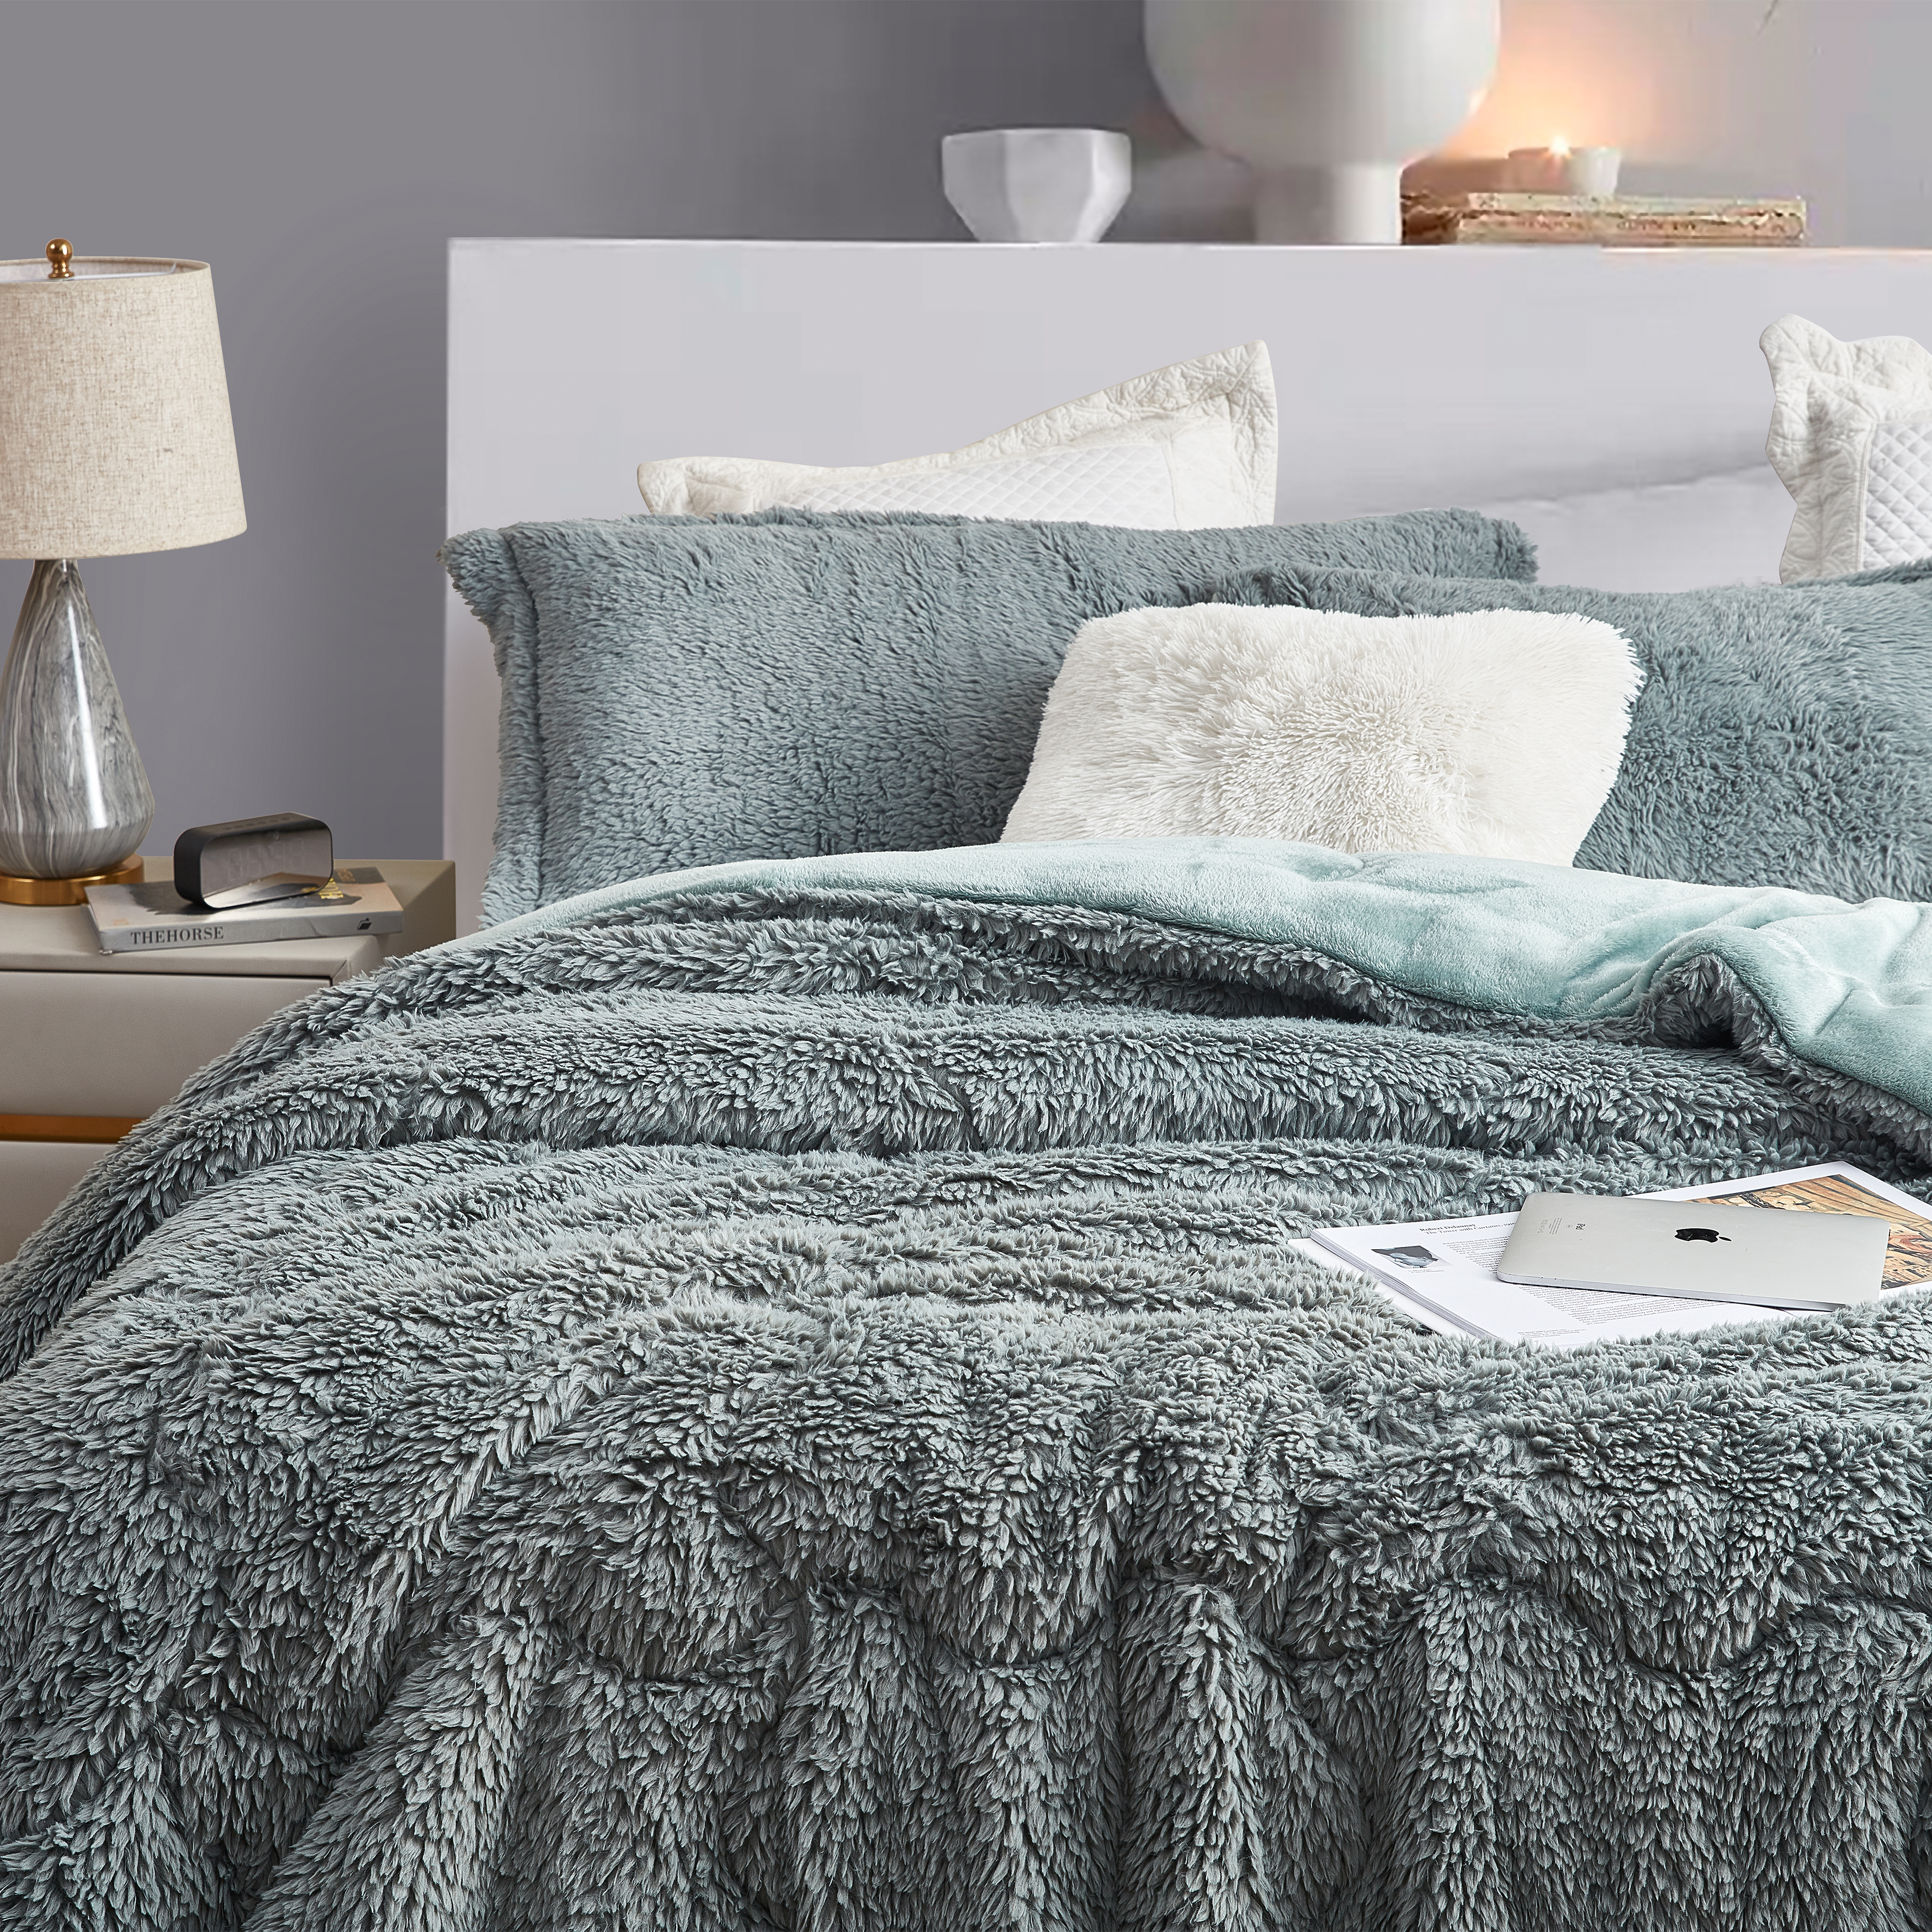 Puts This To Sleep - Coma Inducer® Oversized Comforter - Emerald Gray